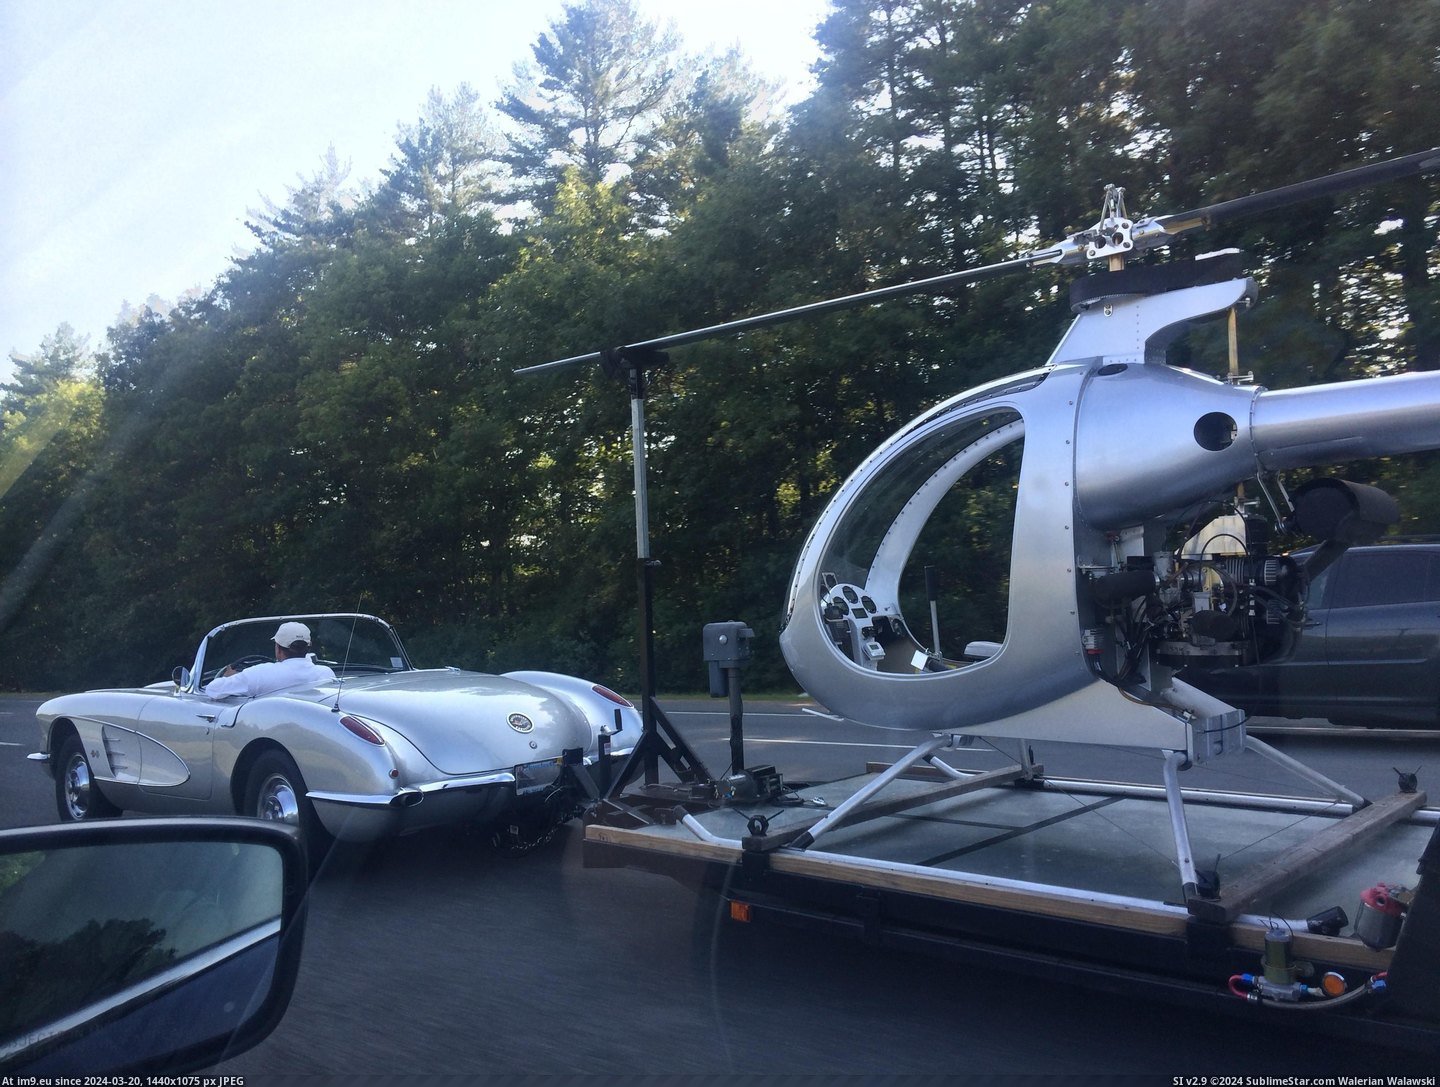 #Life #Guy #Towing #Corvette #Helicopter #Winning [Pics] 50's corvette towing a helicopter. this guy is winning at life. Pic. (Image of album My r/PICS favs))